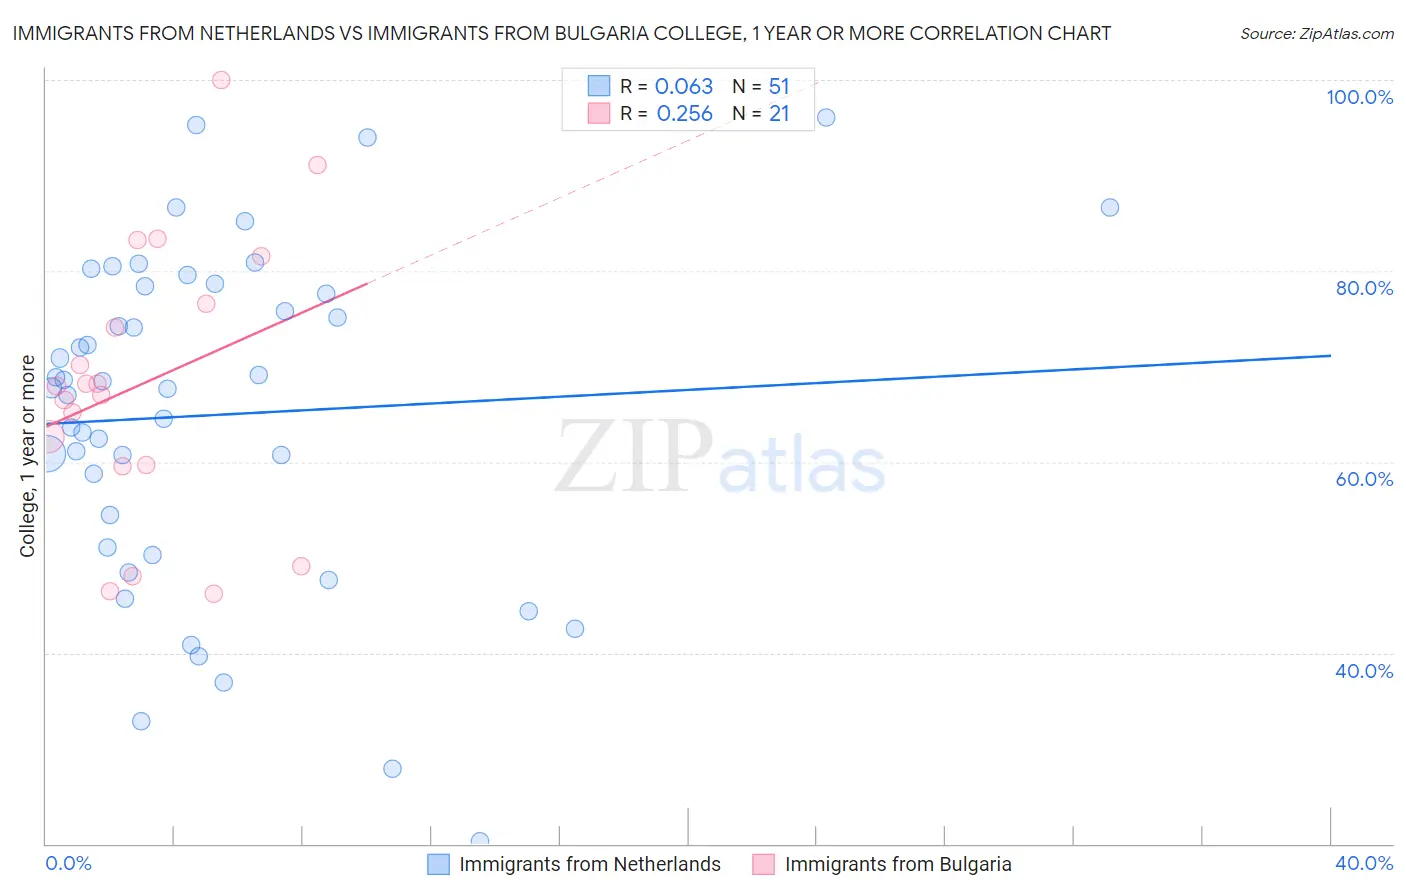 Immigrants from Netherlands vs Immigrants from Bulgaria College, 1 year or more